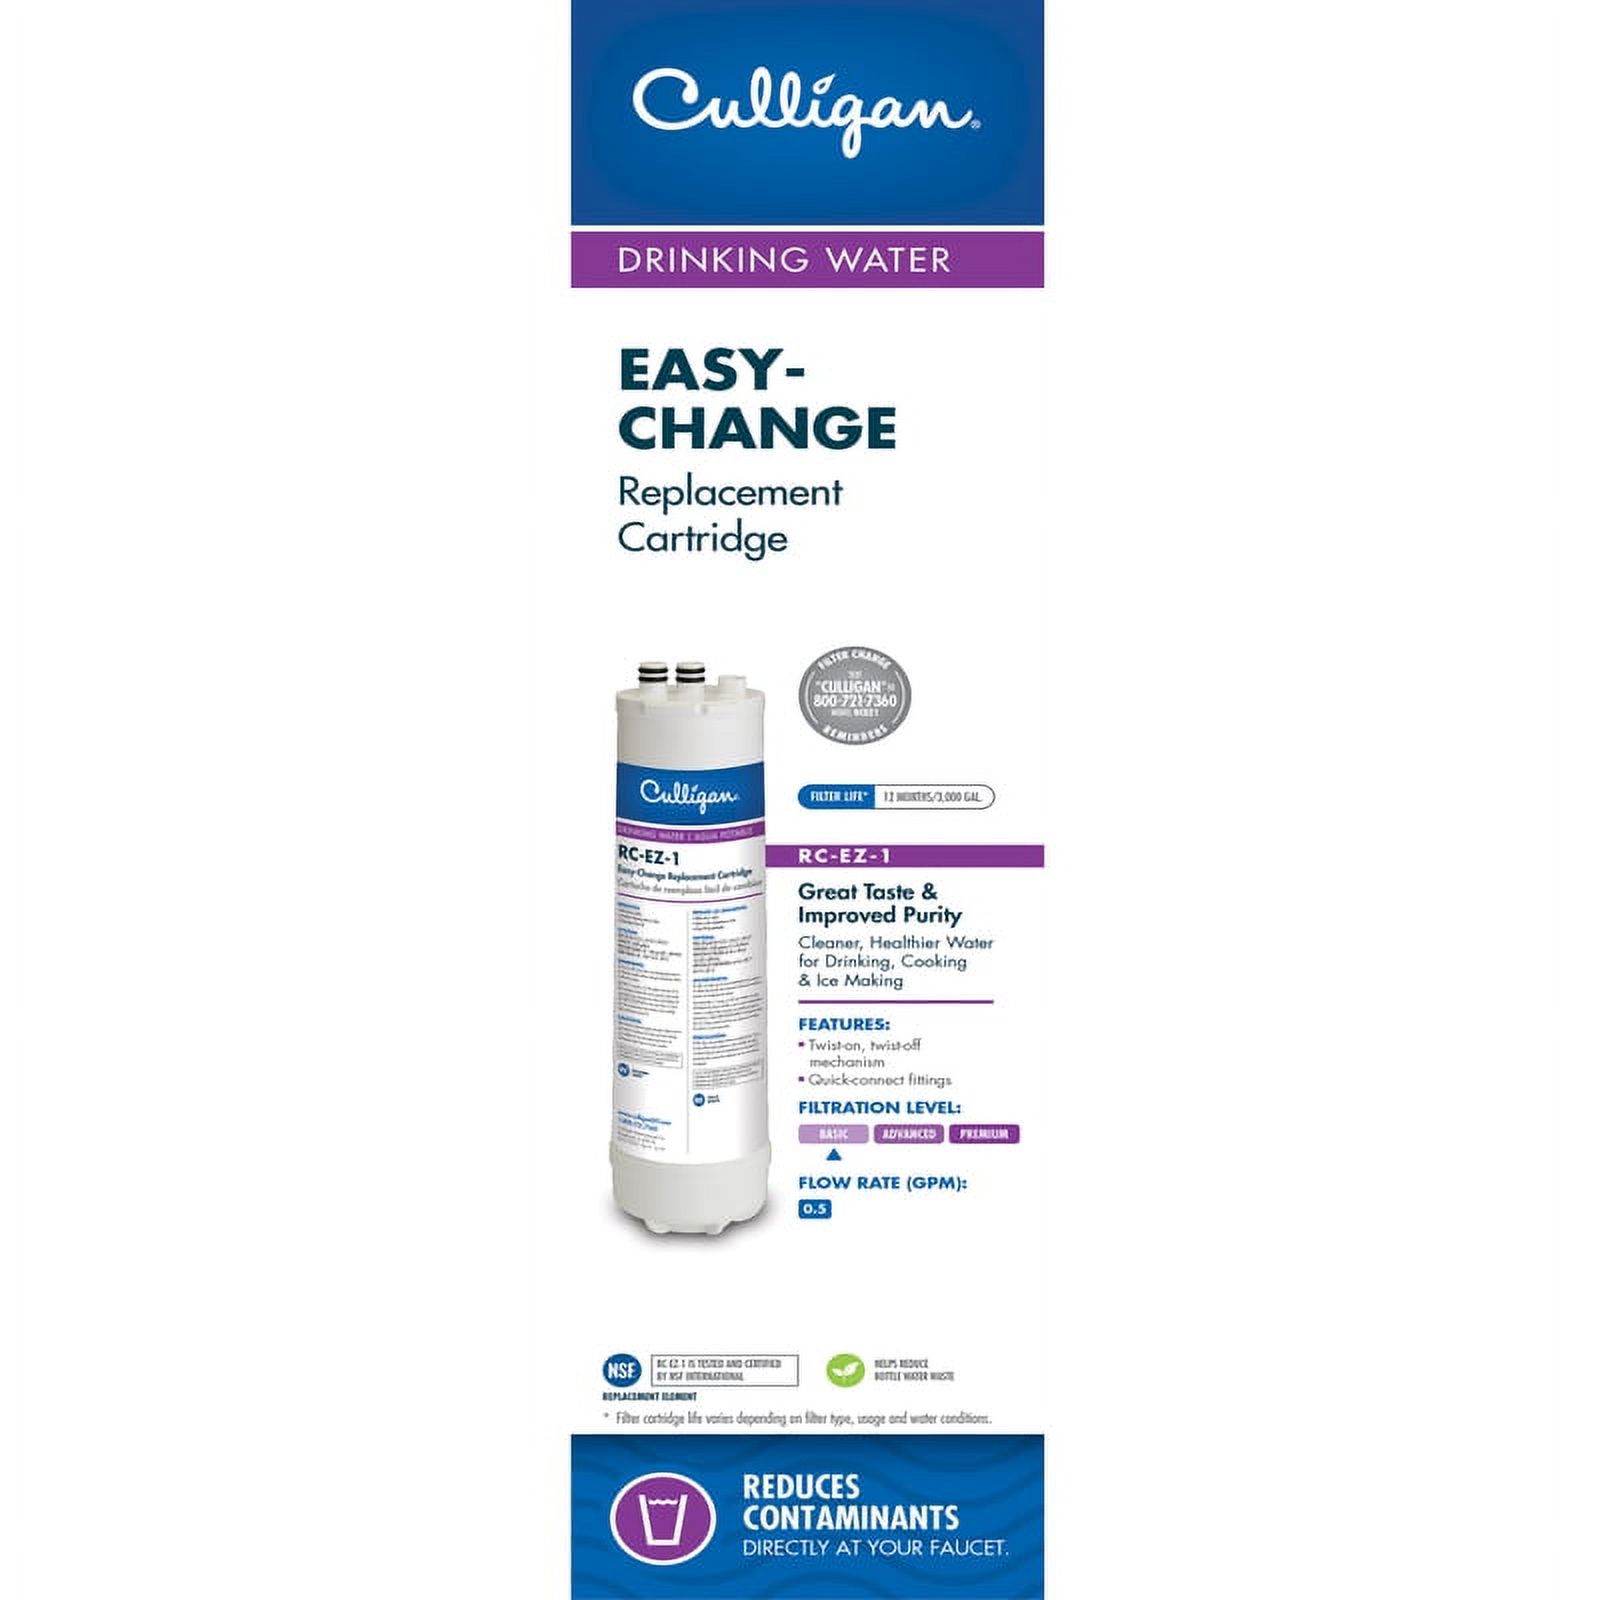 Culligan RC-EZ-1 Easy Change Replacement Filter - image 3 of 4